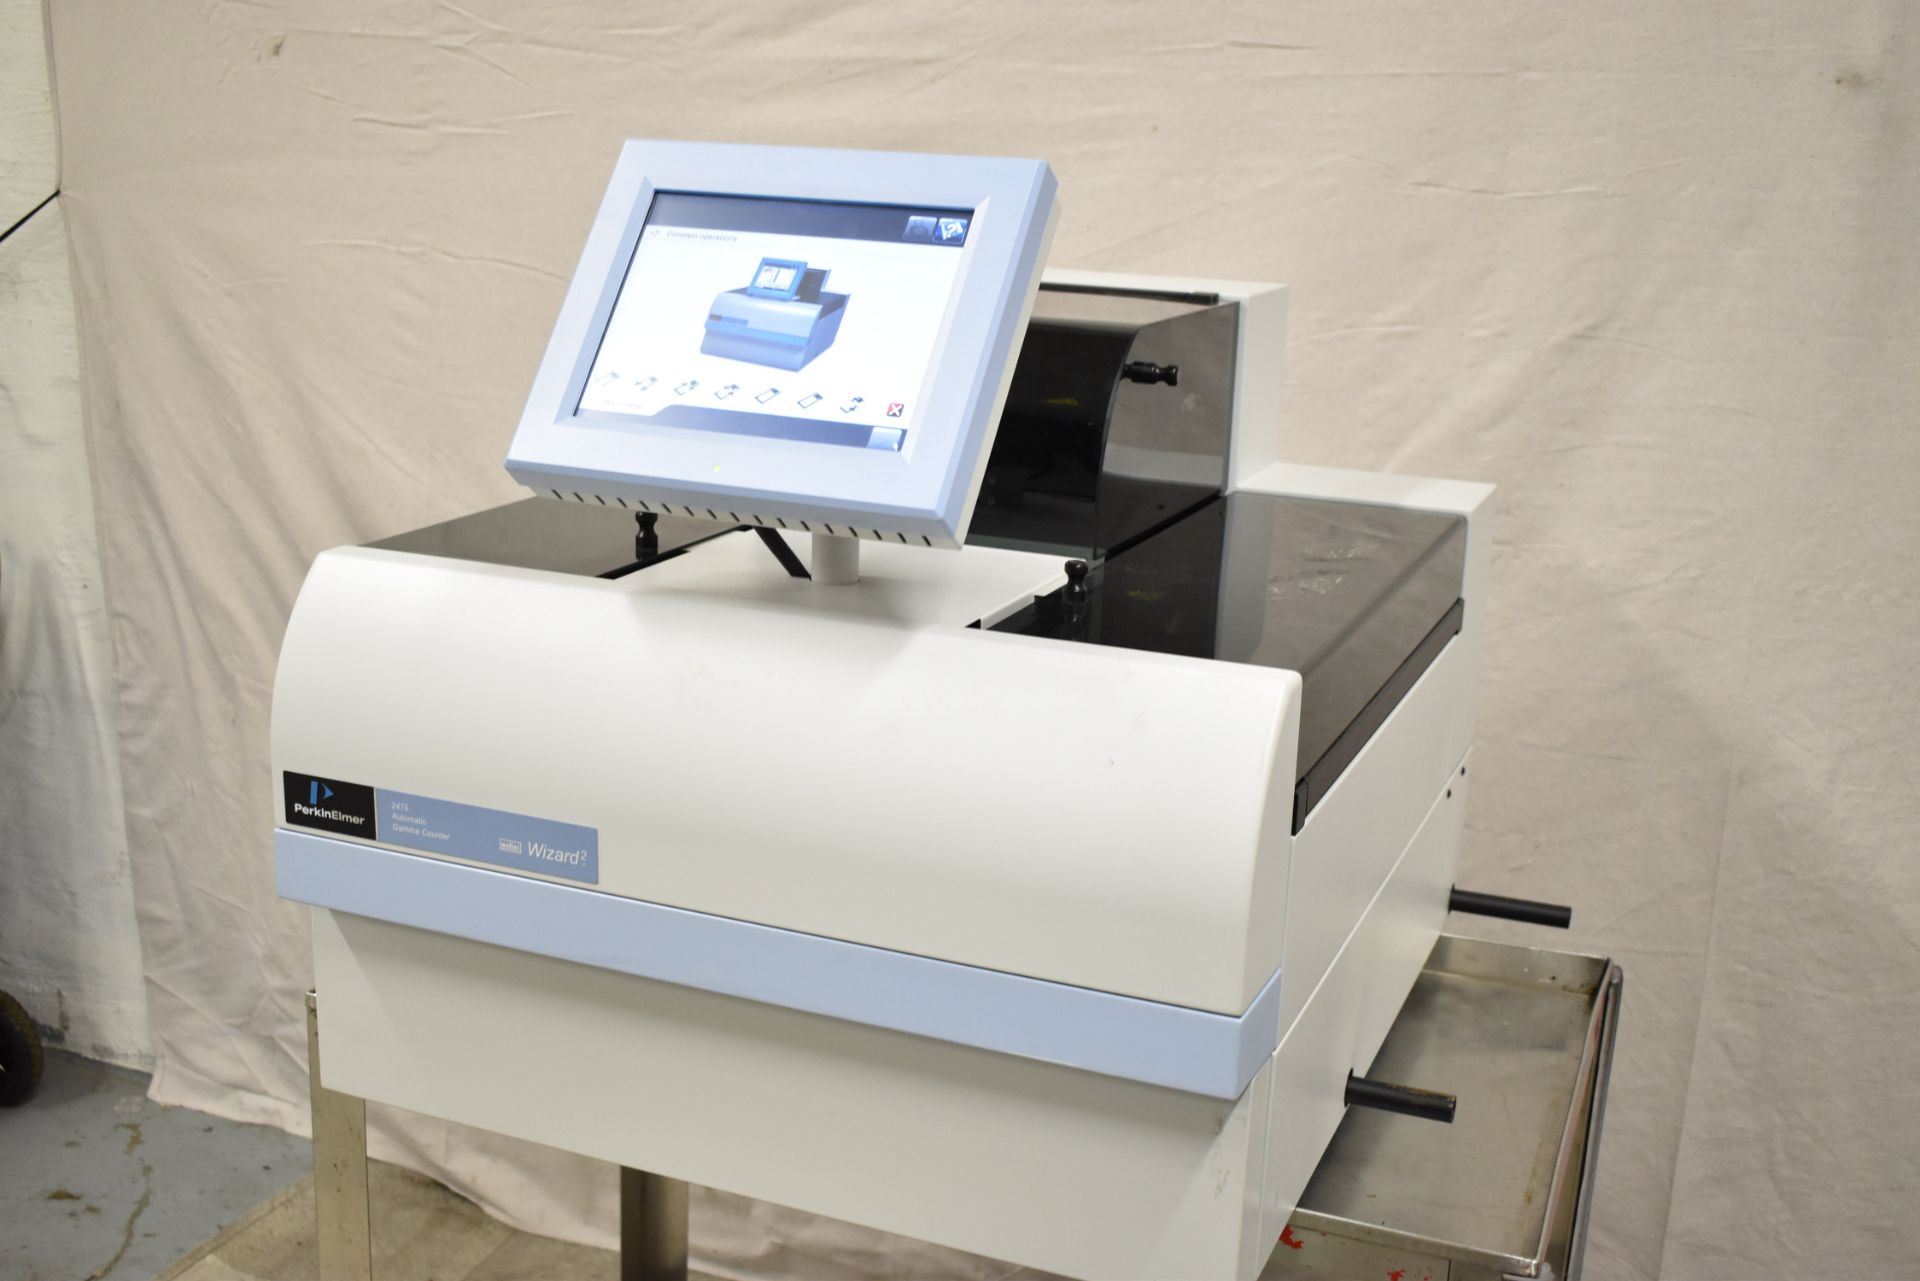 PERKIN ELMER (2011) 2470 WIZARD 2 AUTOMATIC GAMMA COUNTER WITH COLOR TOUCH SCREEN CONTROL, 13MM DIA. - Image 3 of 11